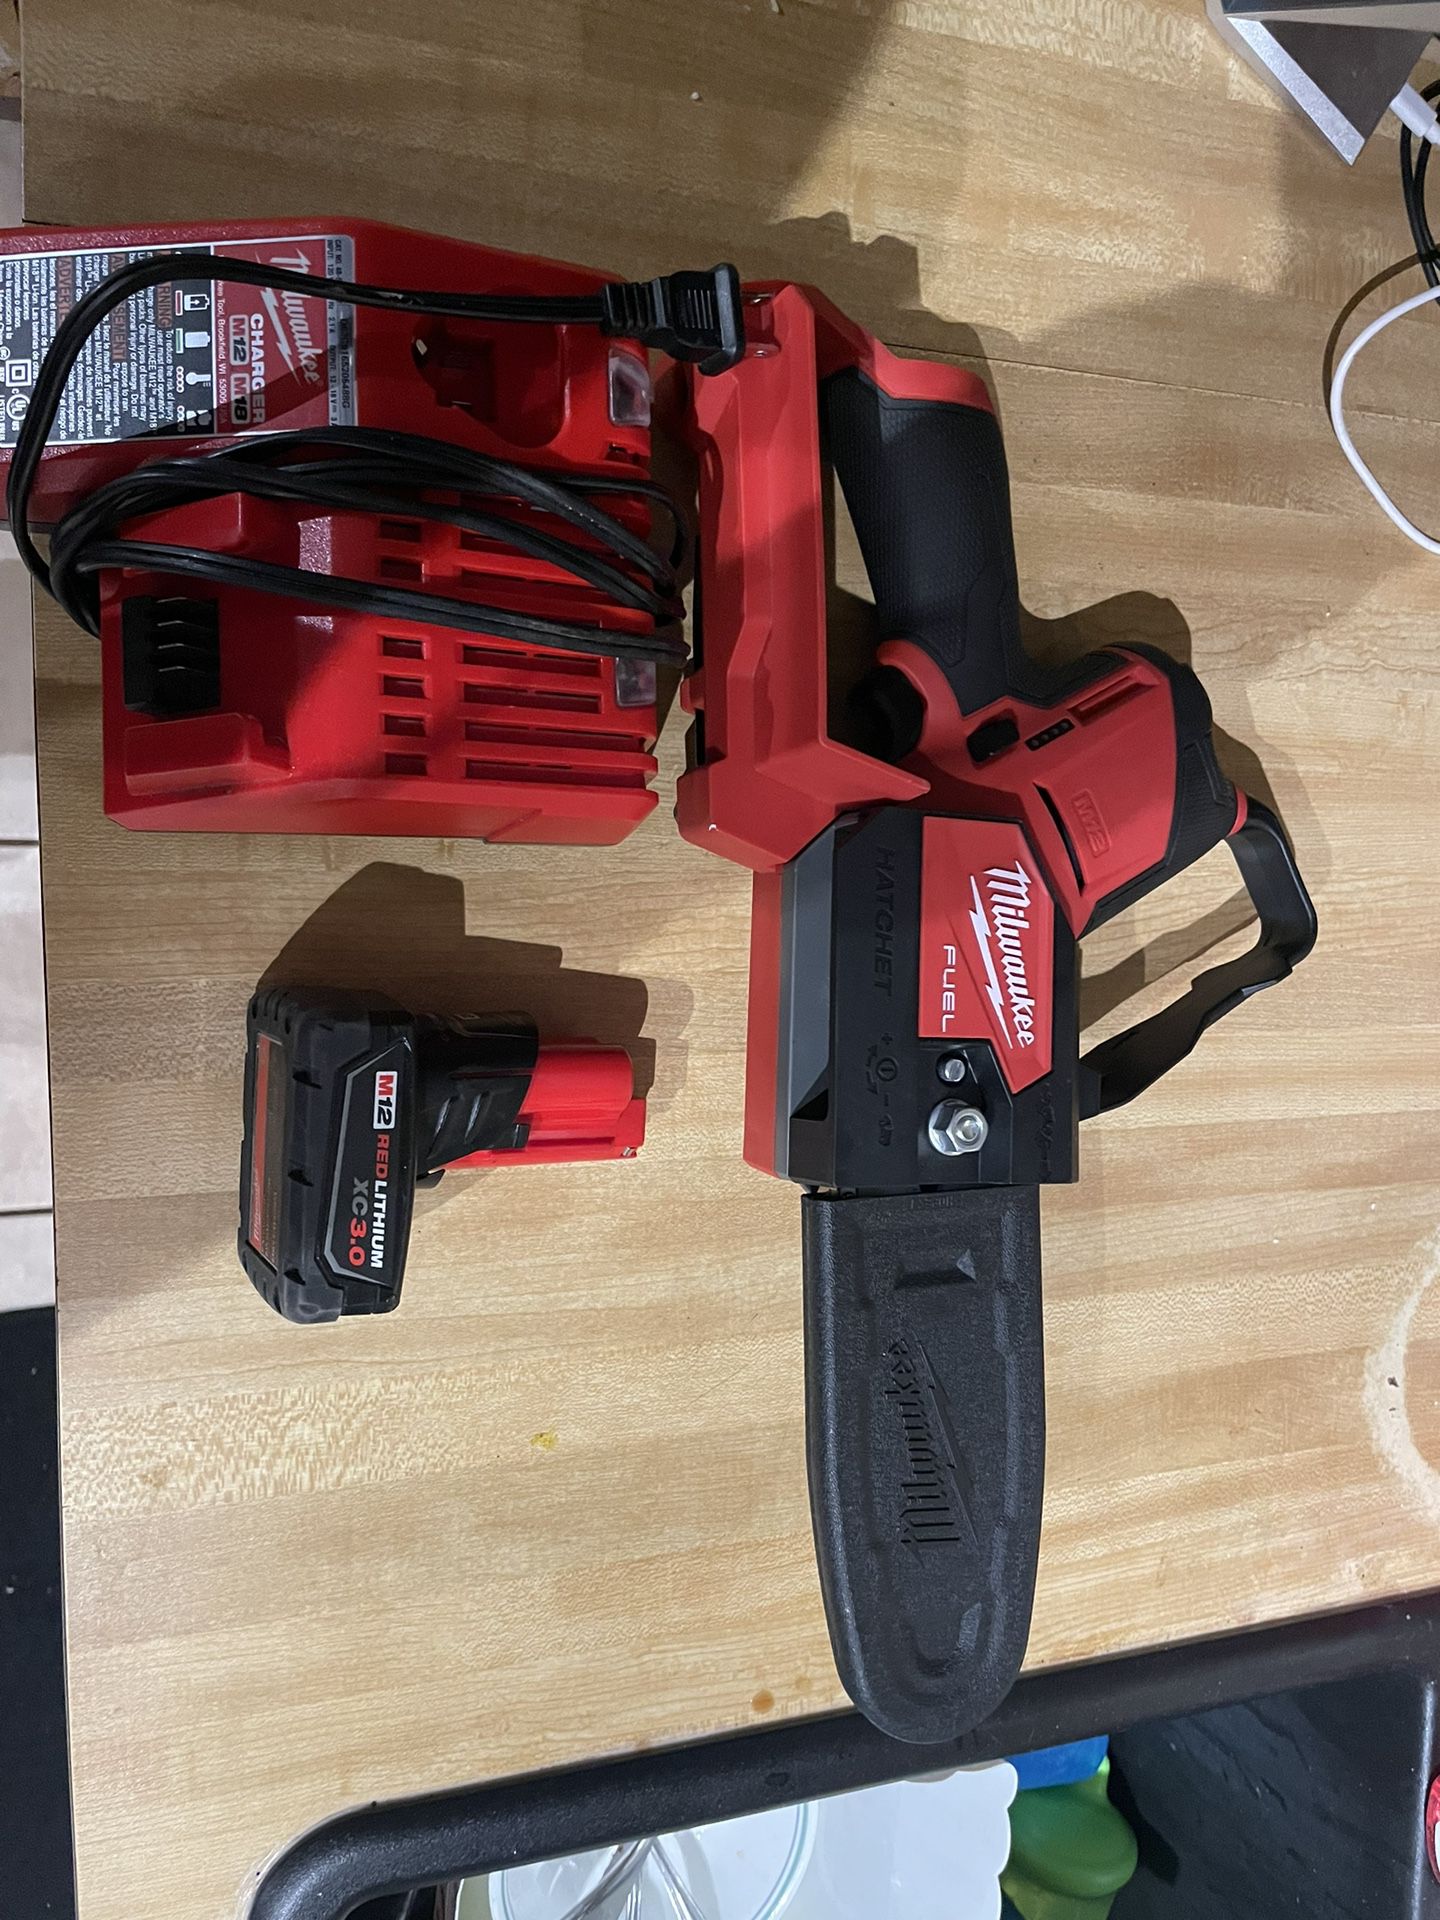 Milwaukee M12 Chainsaw 8” With 3 Ah Batt And Charger Excellent Condition $200 In N Lakeland 